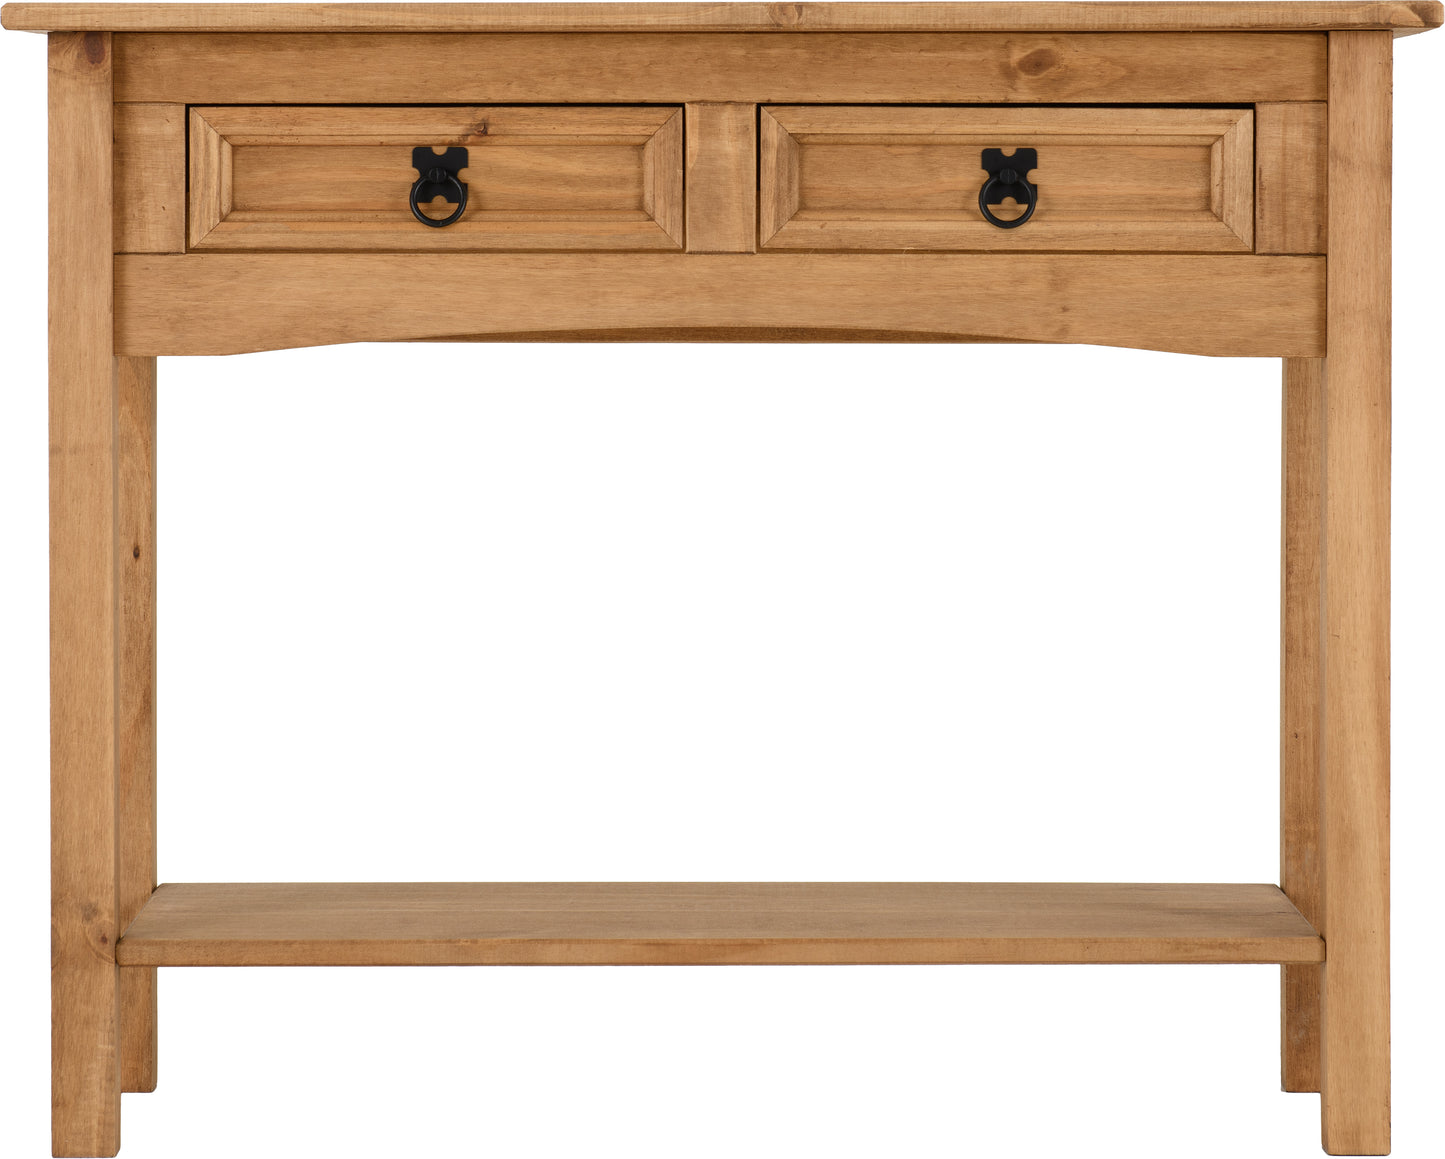 CORONA 2 DRAWER CONSOLE TABLE WITH SHELF - DISTRESSED WAXED PINE